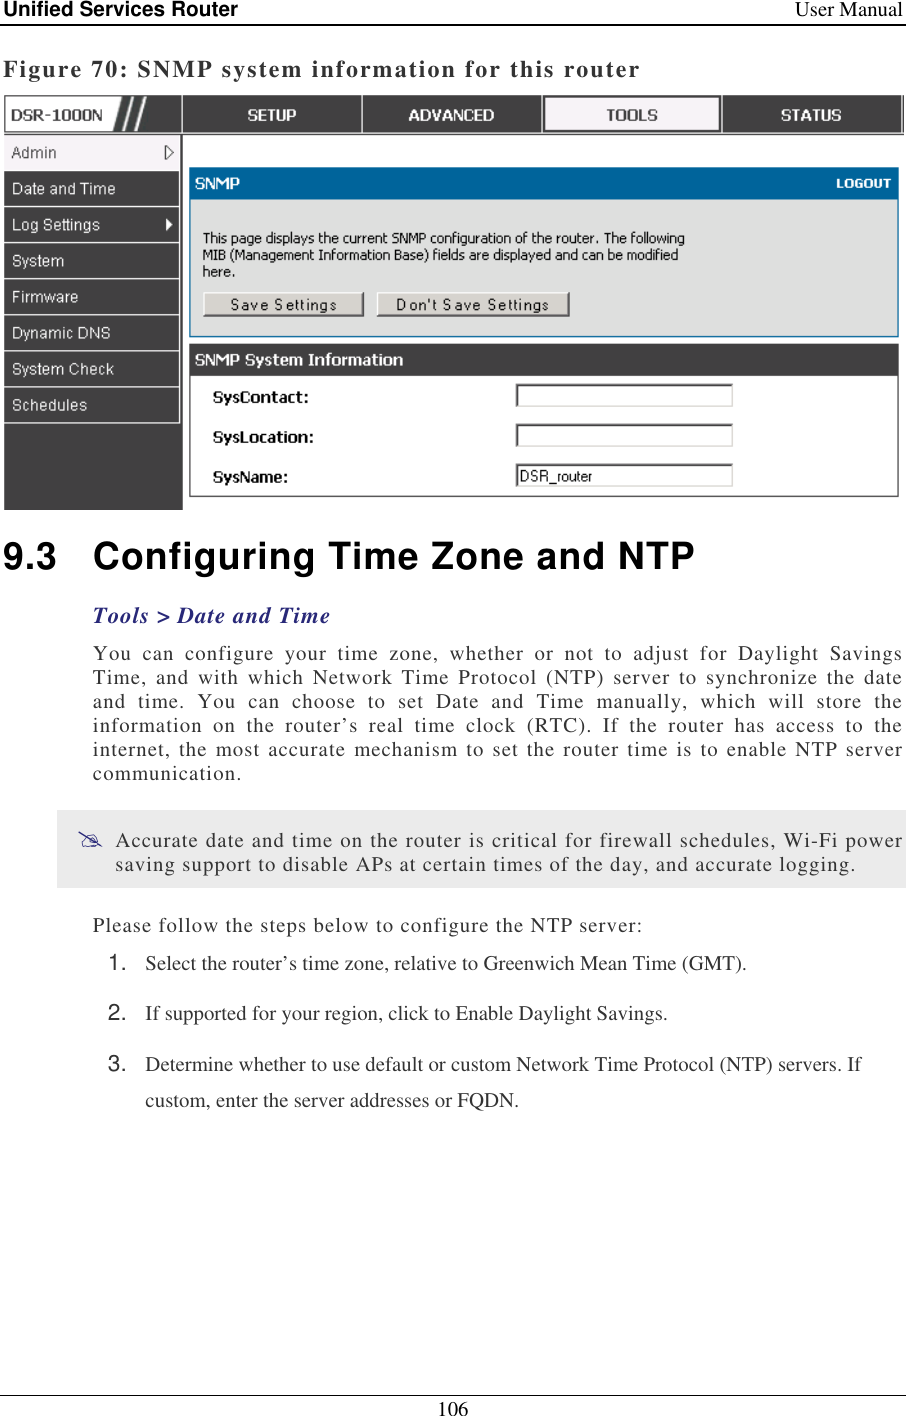 Unified Services Router    User Manual 106  Figure 70: SNMP system information for this router  9.3  Configuring Time Zone and NTP Tools &gt; Date and Time You  can  configure  your  time  zone,  whether  or  not  to  adjust  for  Daylight  Savings Time,  and  with  which  Network  Time  Protocol  (NTP)  server  to  synchronize  the  date and  time.  You  can  choose  to  set  Date  and  Time  manually,  which  will  store  the information  on  the  router’s  real  time  clock  (RTC).  If  the  router  has  access  to  the internet,  the  most  accurate  mechanism  to set  the router time  is to enable  NTP server communication.   Accurate date and time on the router is critical for firewall schedules, Wi-Fi power saving support to disable APs at certain times of the day, and accurate logging.  Please follow the steps below to configure the NTP server: 1.  Select the router’s time zone, relative to Greenwich Mean Time (GMT). 2.  If supported for your region, click to Enable Daylight Savings. 3.  Determine whether to use default or custom Network Time Protocol (NTP) servers. If custom, enter the server addresses or FQDN. 